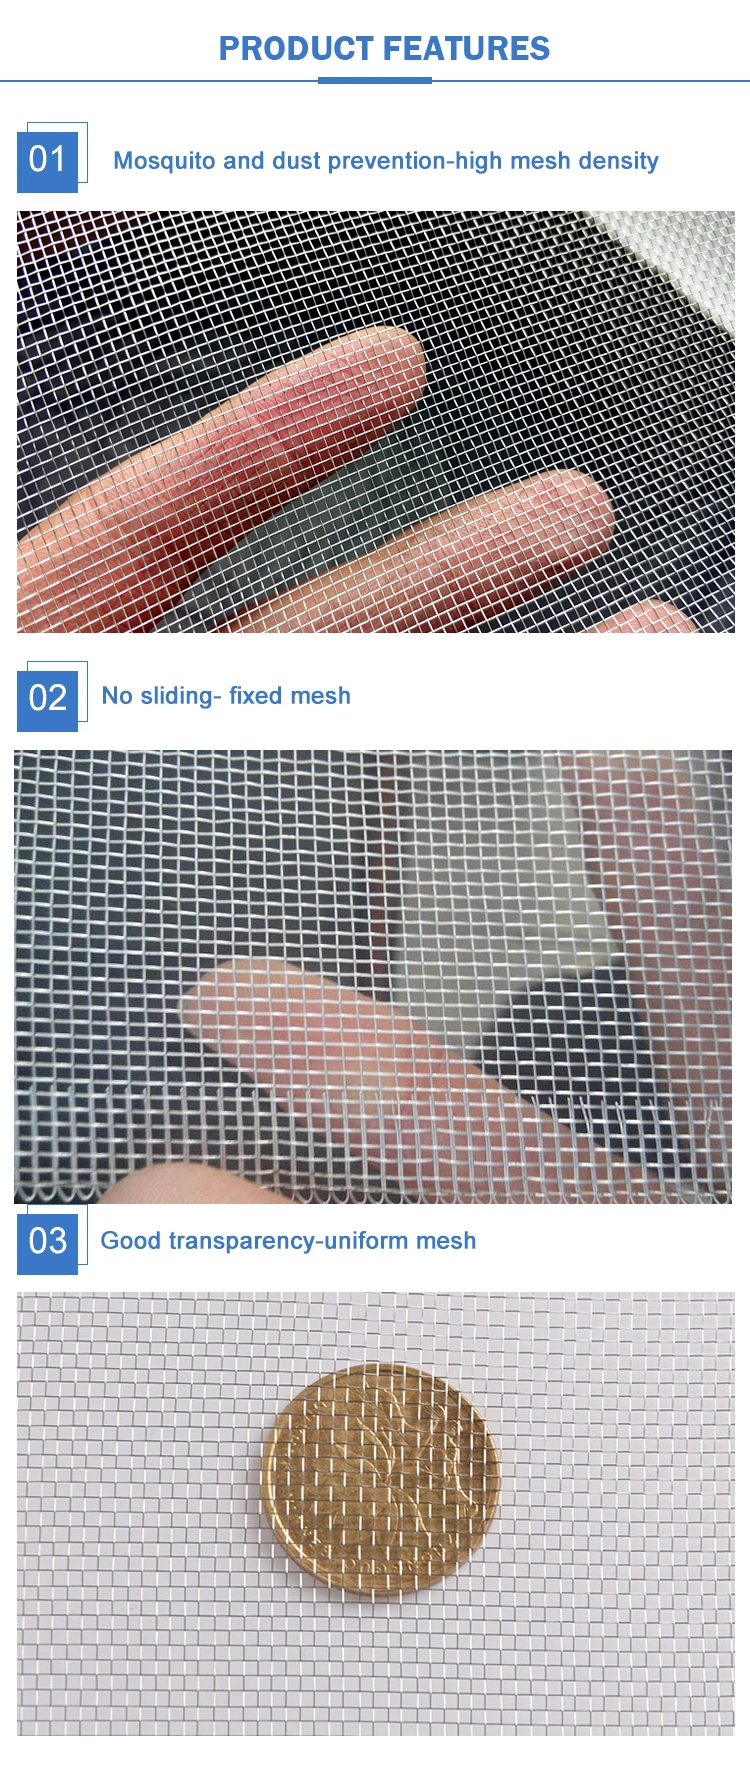 High Quality Soundproof Anti Insect Mosquito Net Aluminum Wire Mesh Fly Window Screen